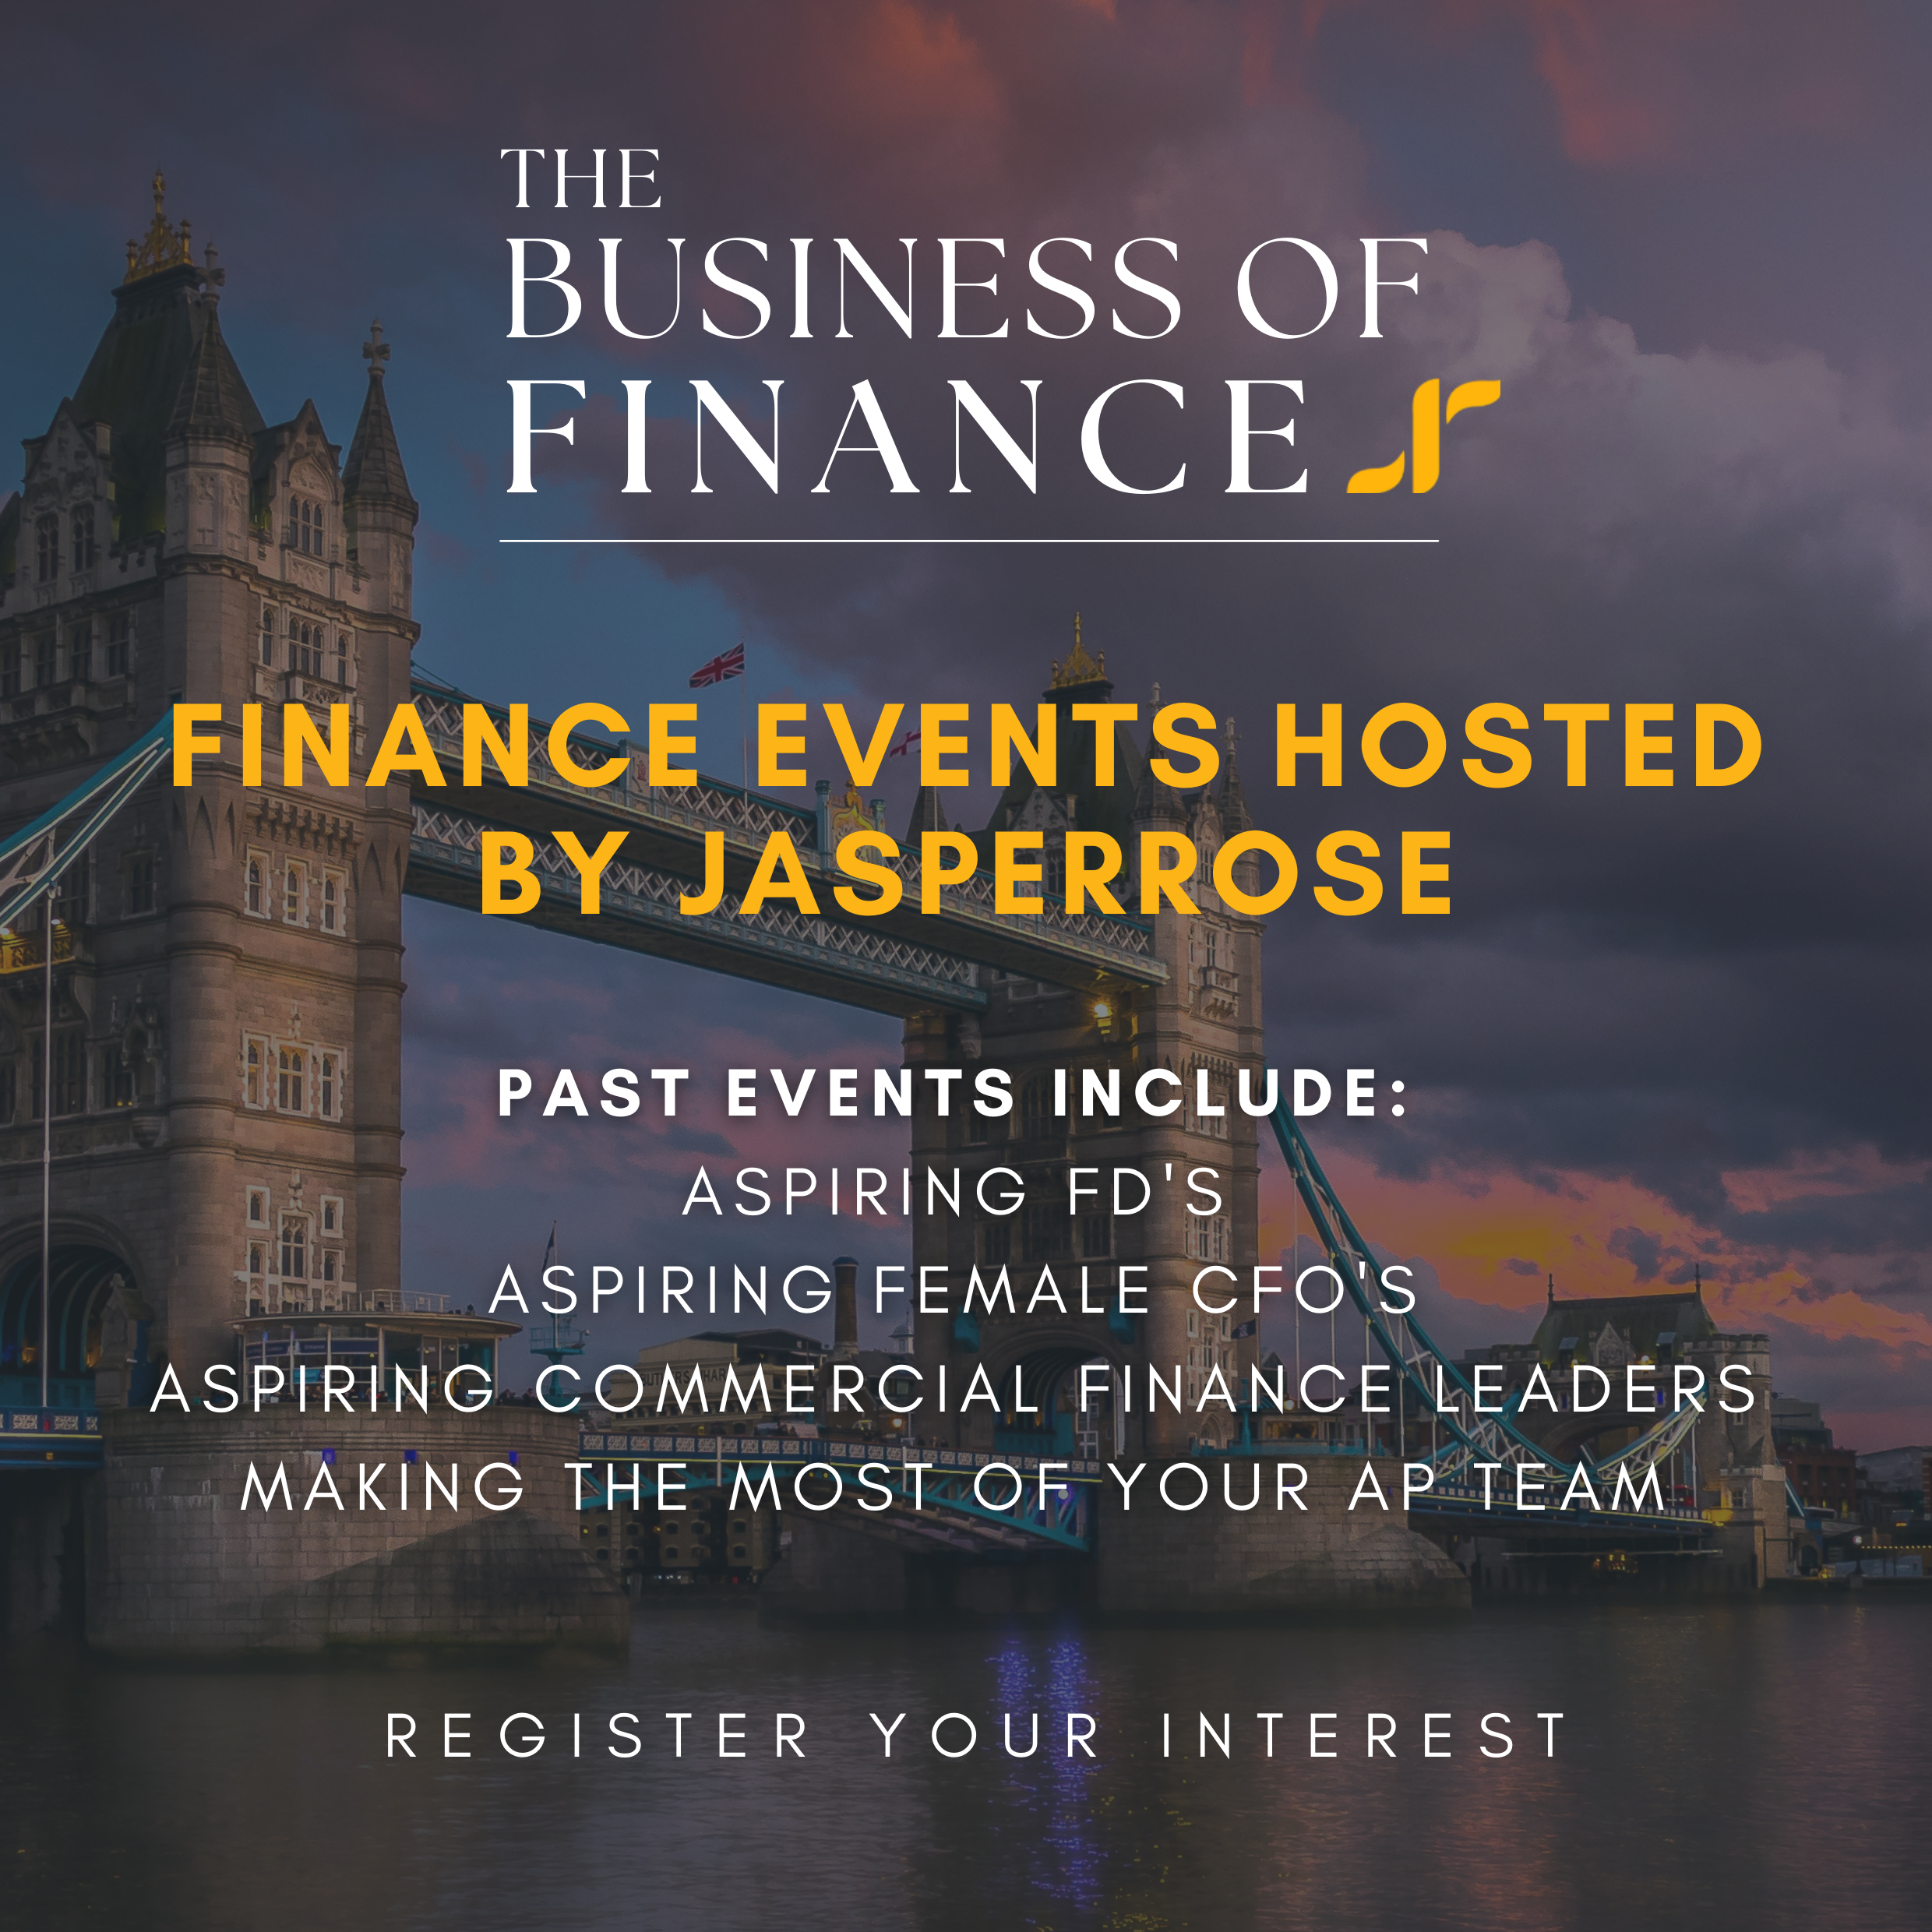 Register your interest in finance events hosted by JasperRose